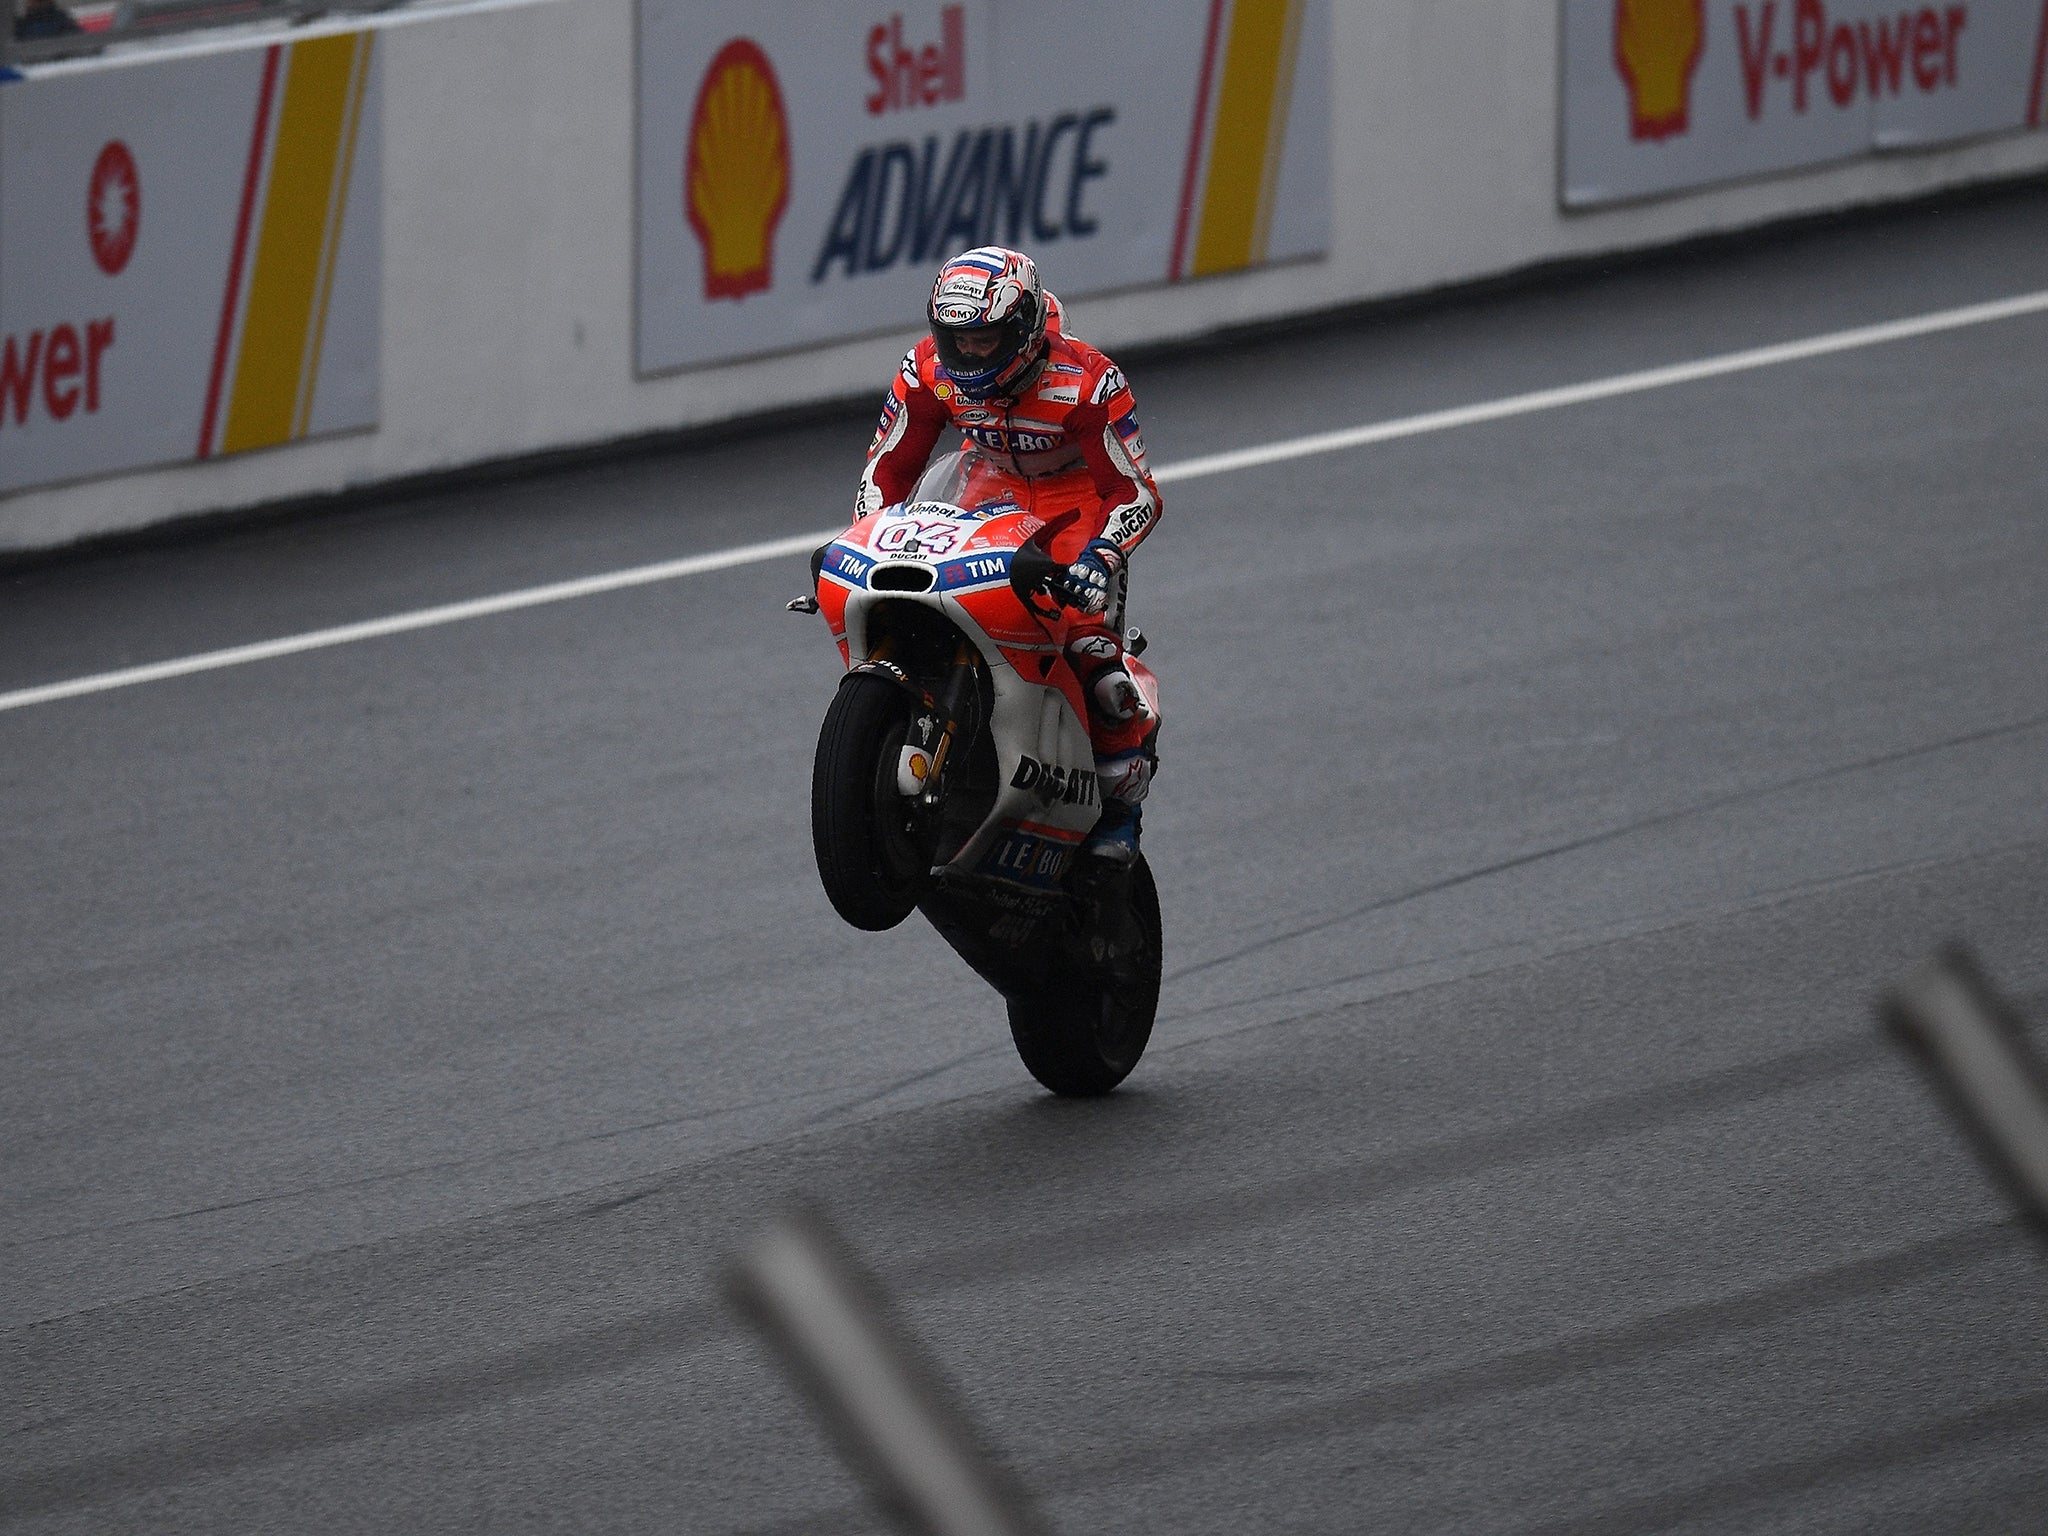 Dovizioso clinched a sixth victory of the season